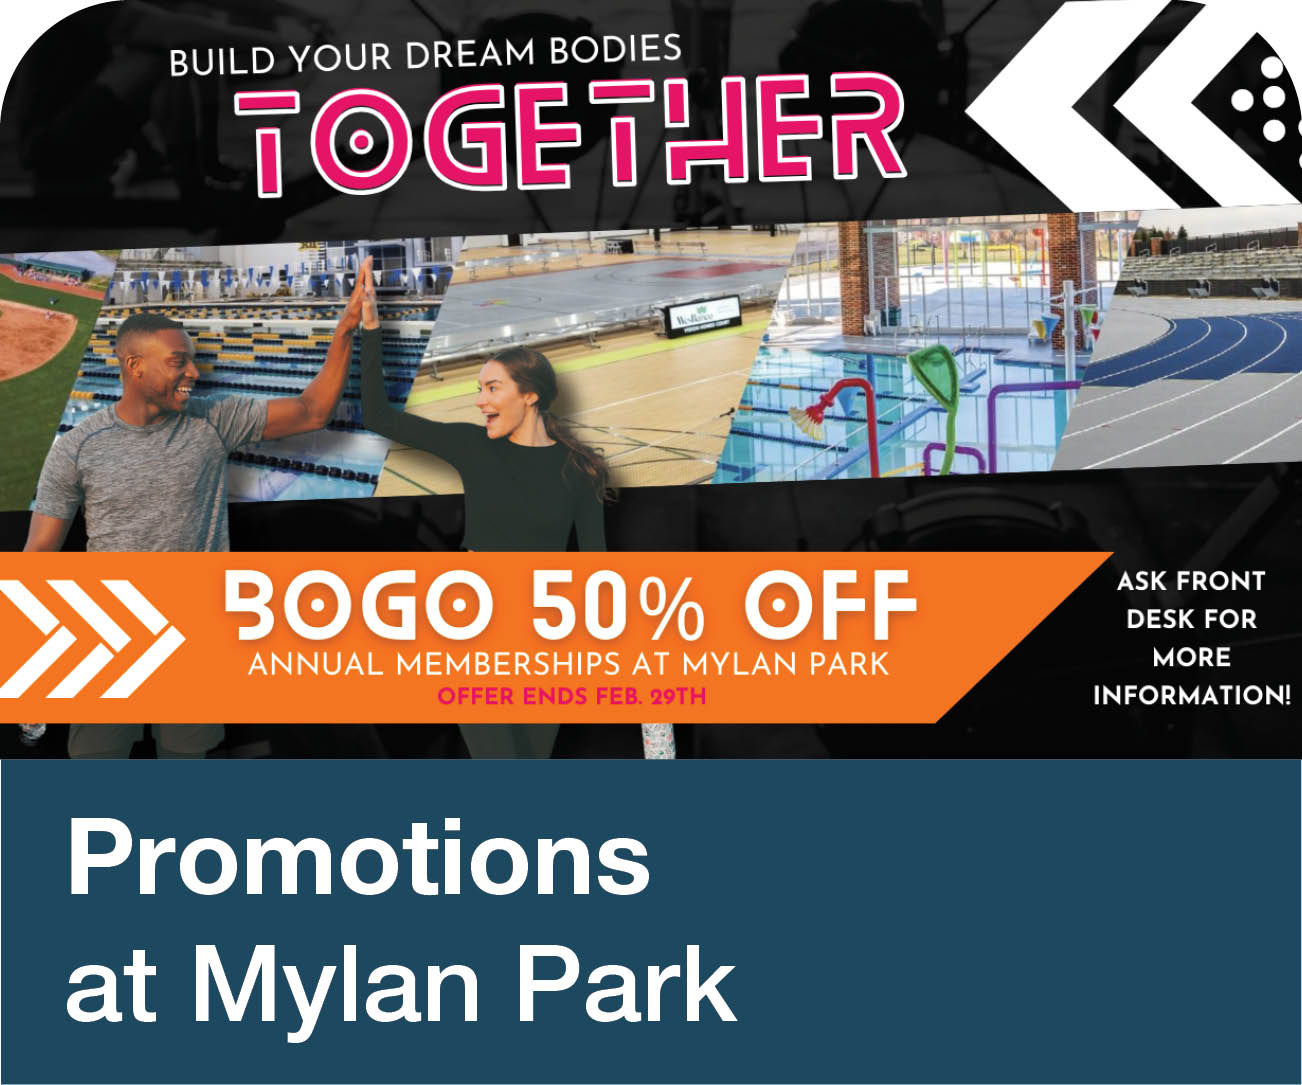 Promotions at Mylan Park